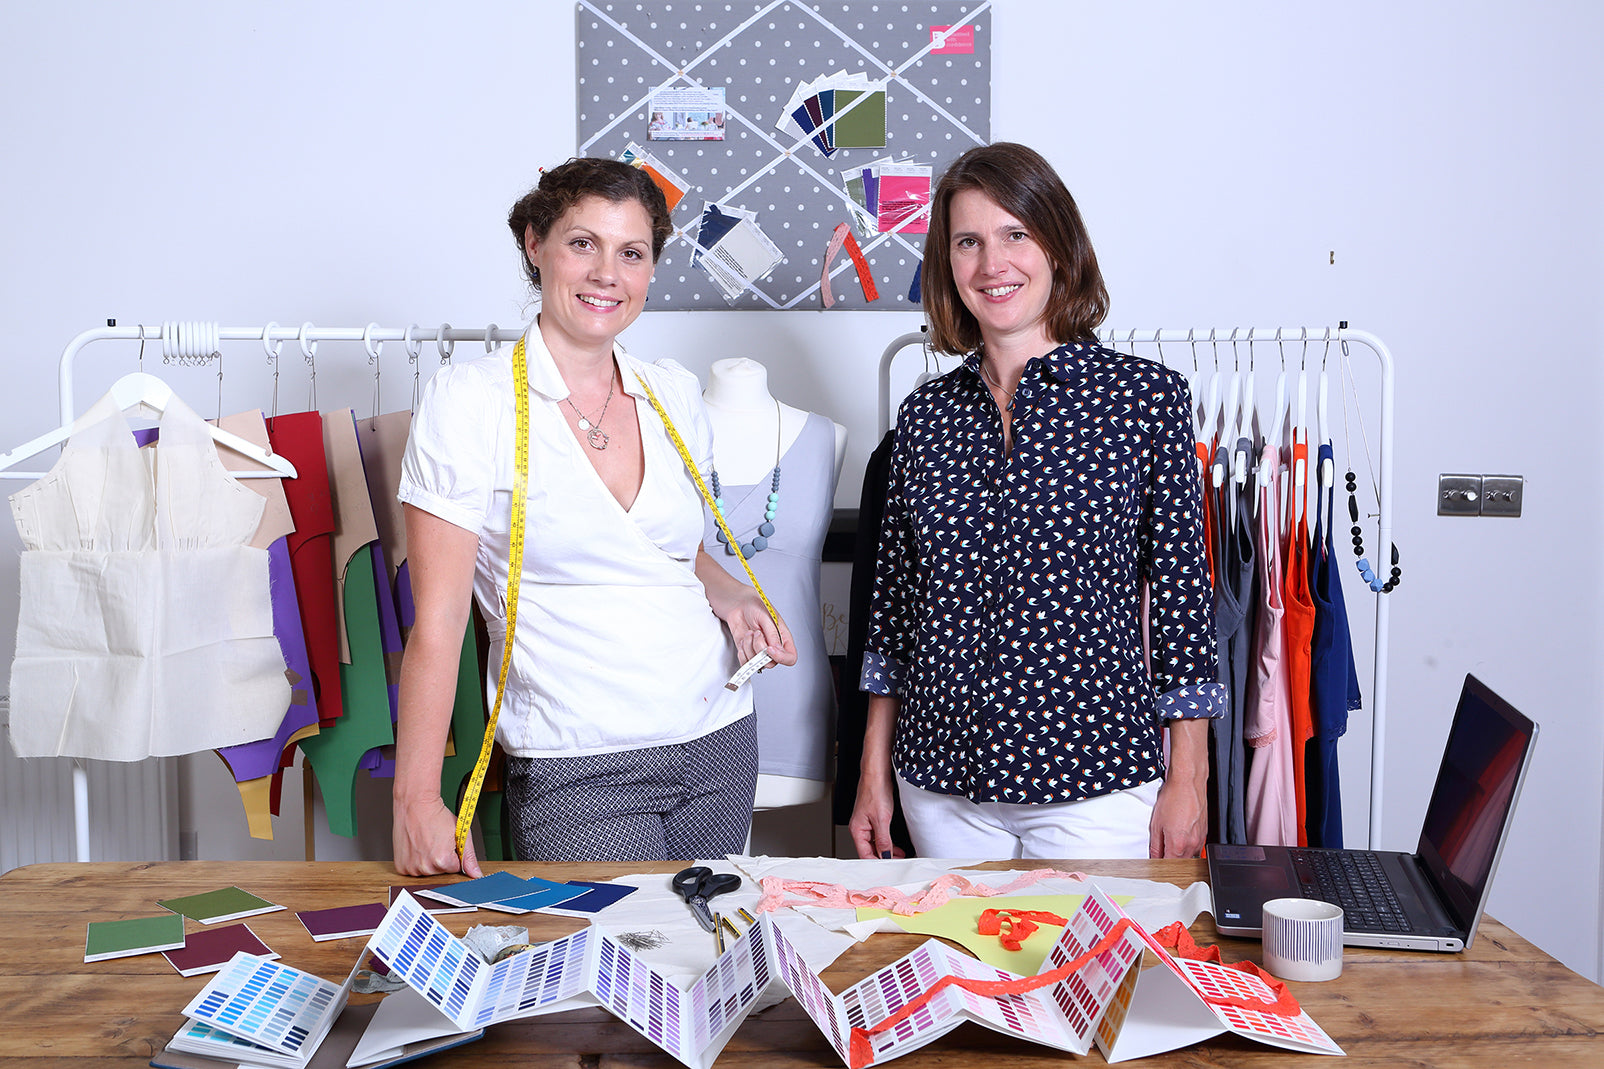 Second Hand September: Launch of breastfeeding tops Buy Back and Pre-Loved Service are newest initiatives from Innovate UK backed circular maternity brand, The Bshirt.